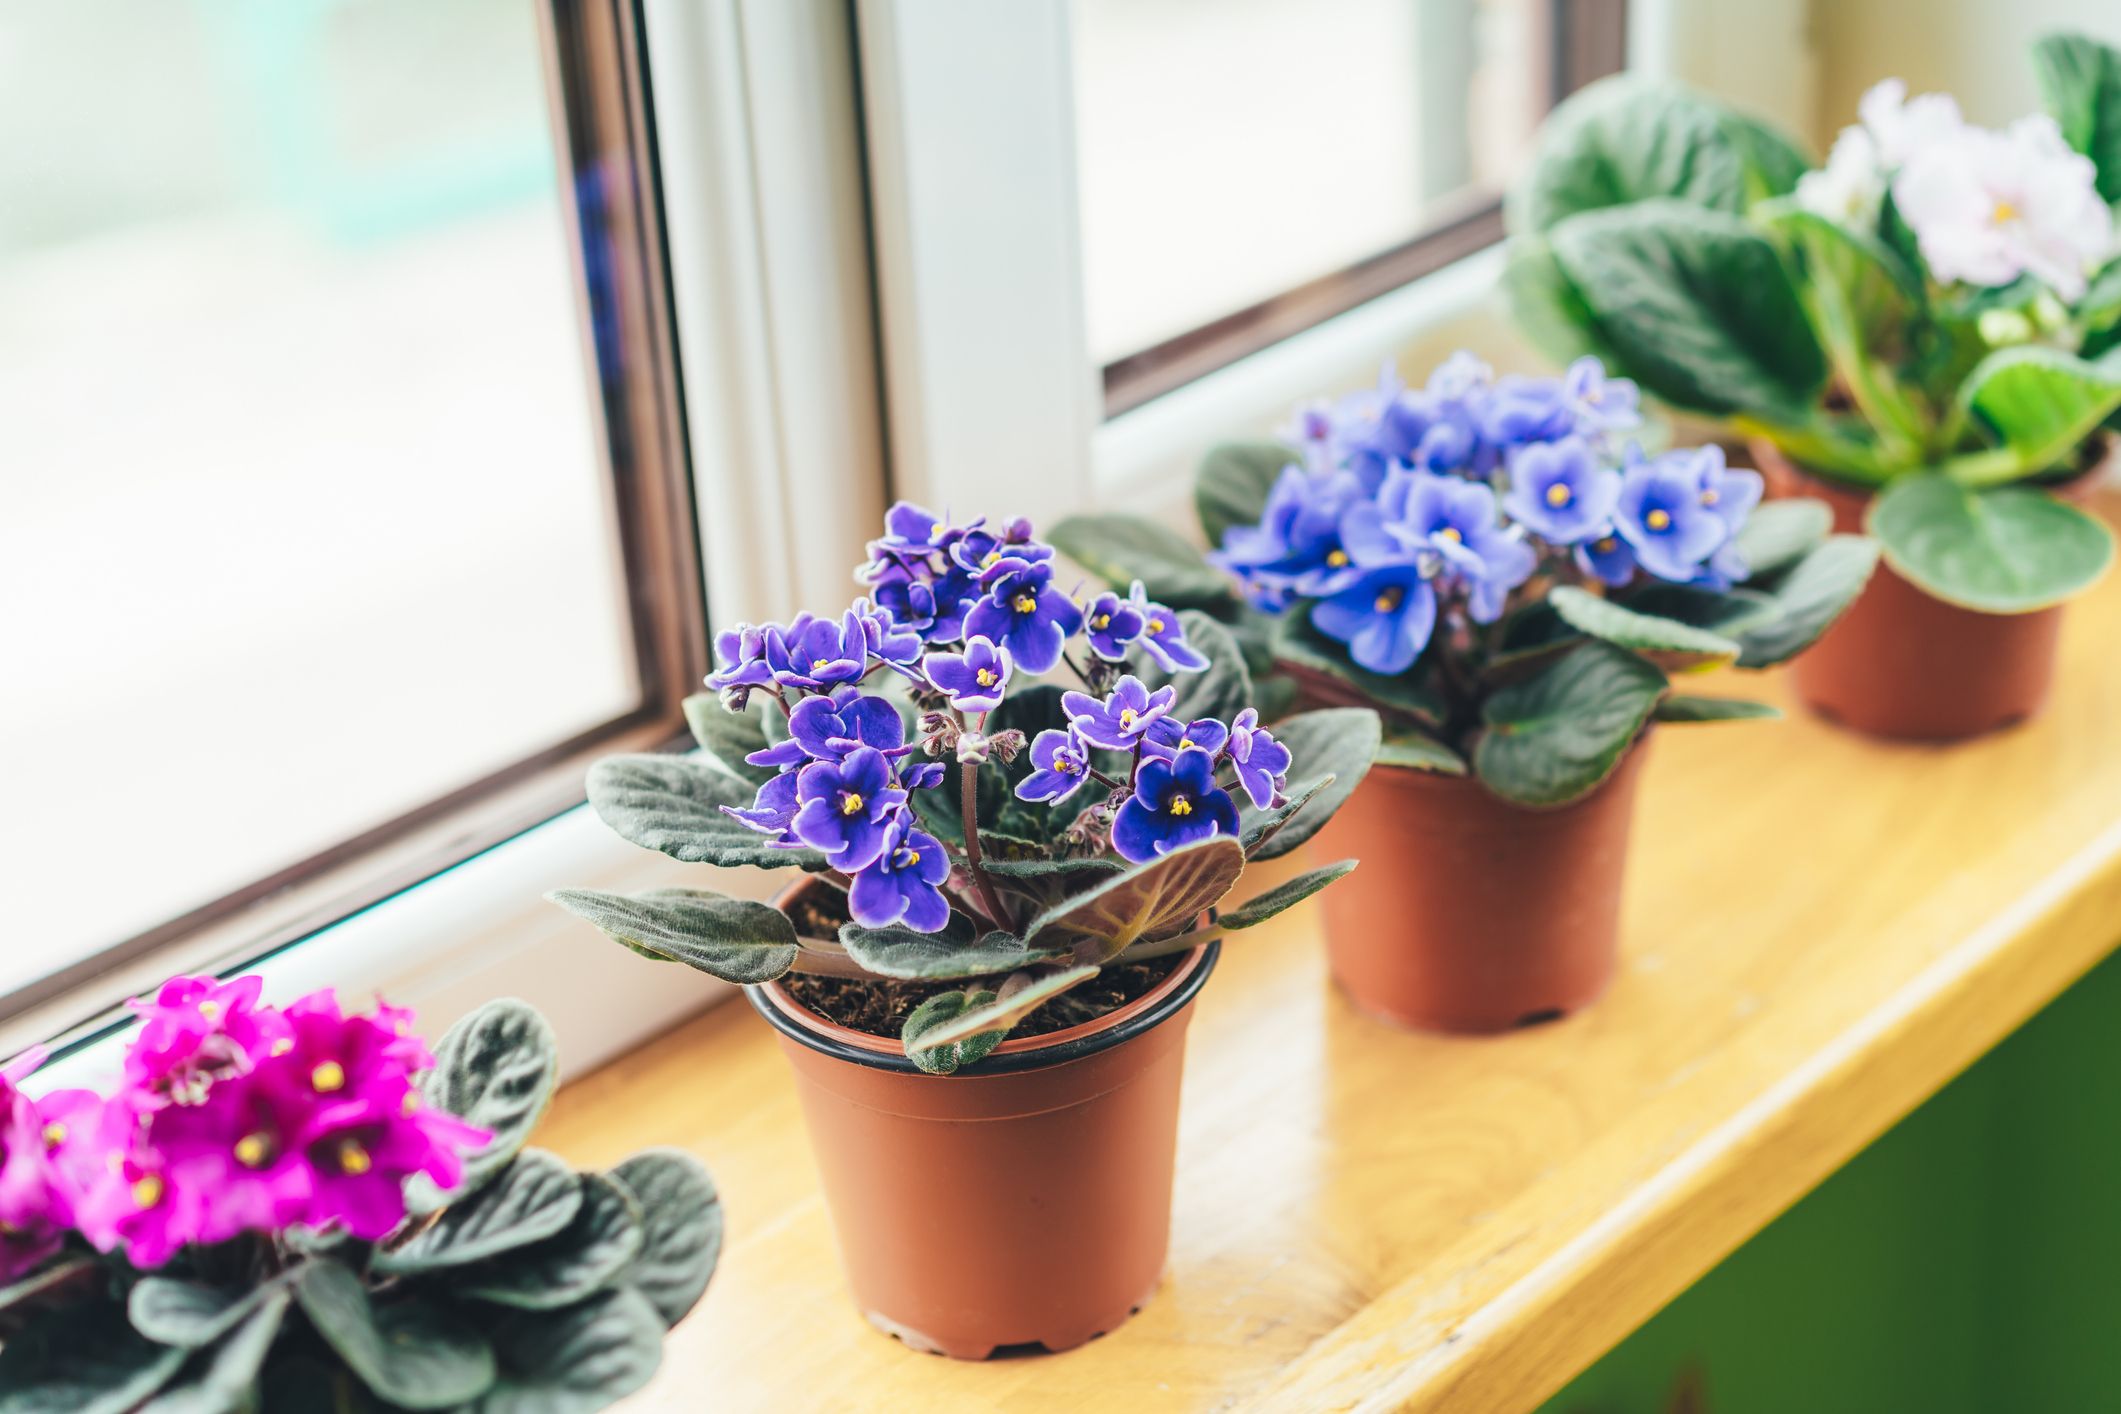 How to Grow African Violets - African Violet Care Tips